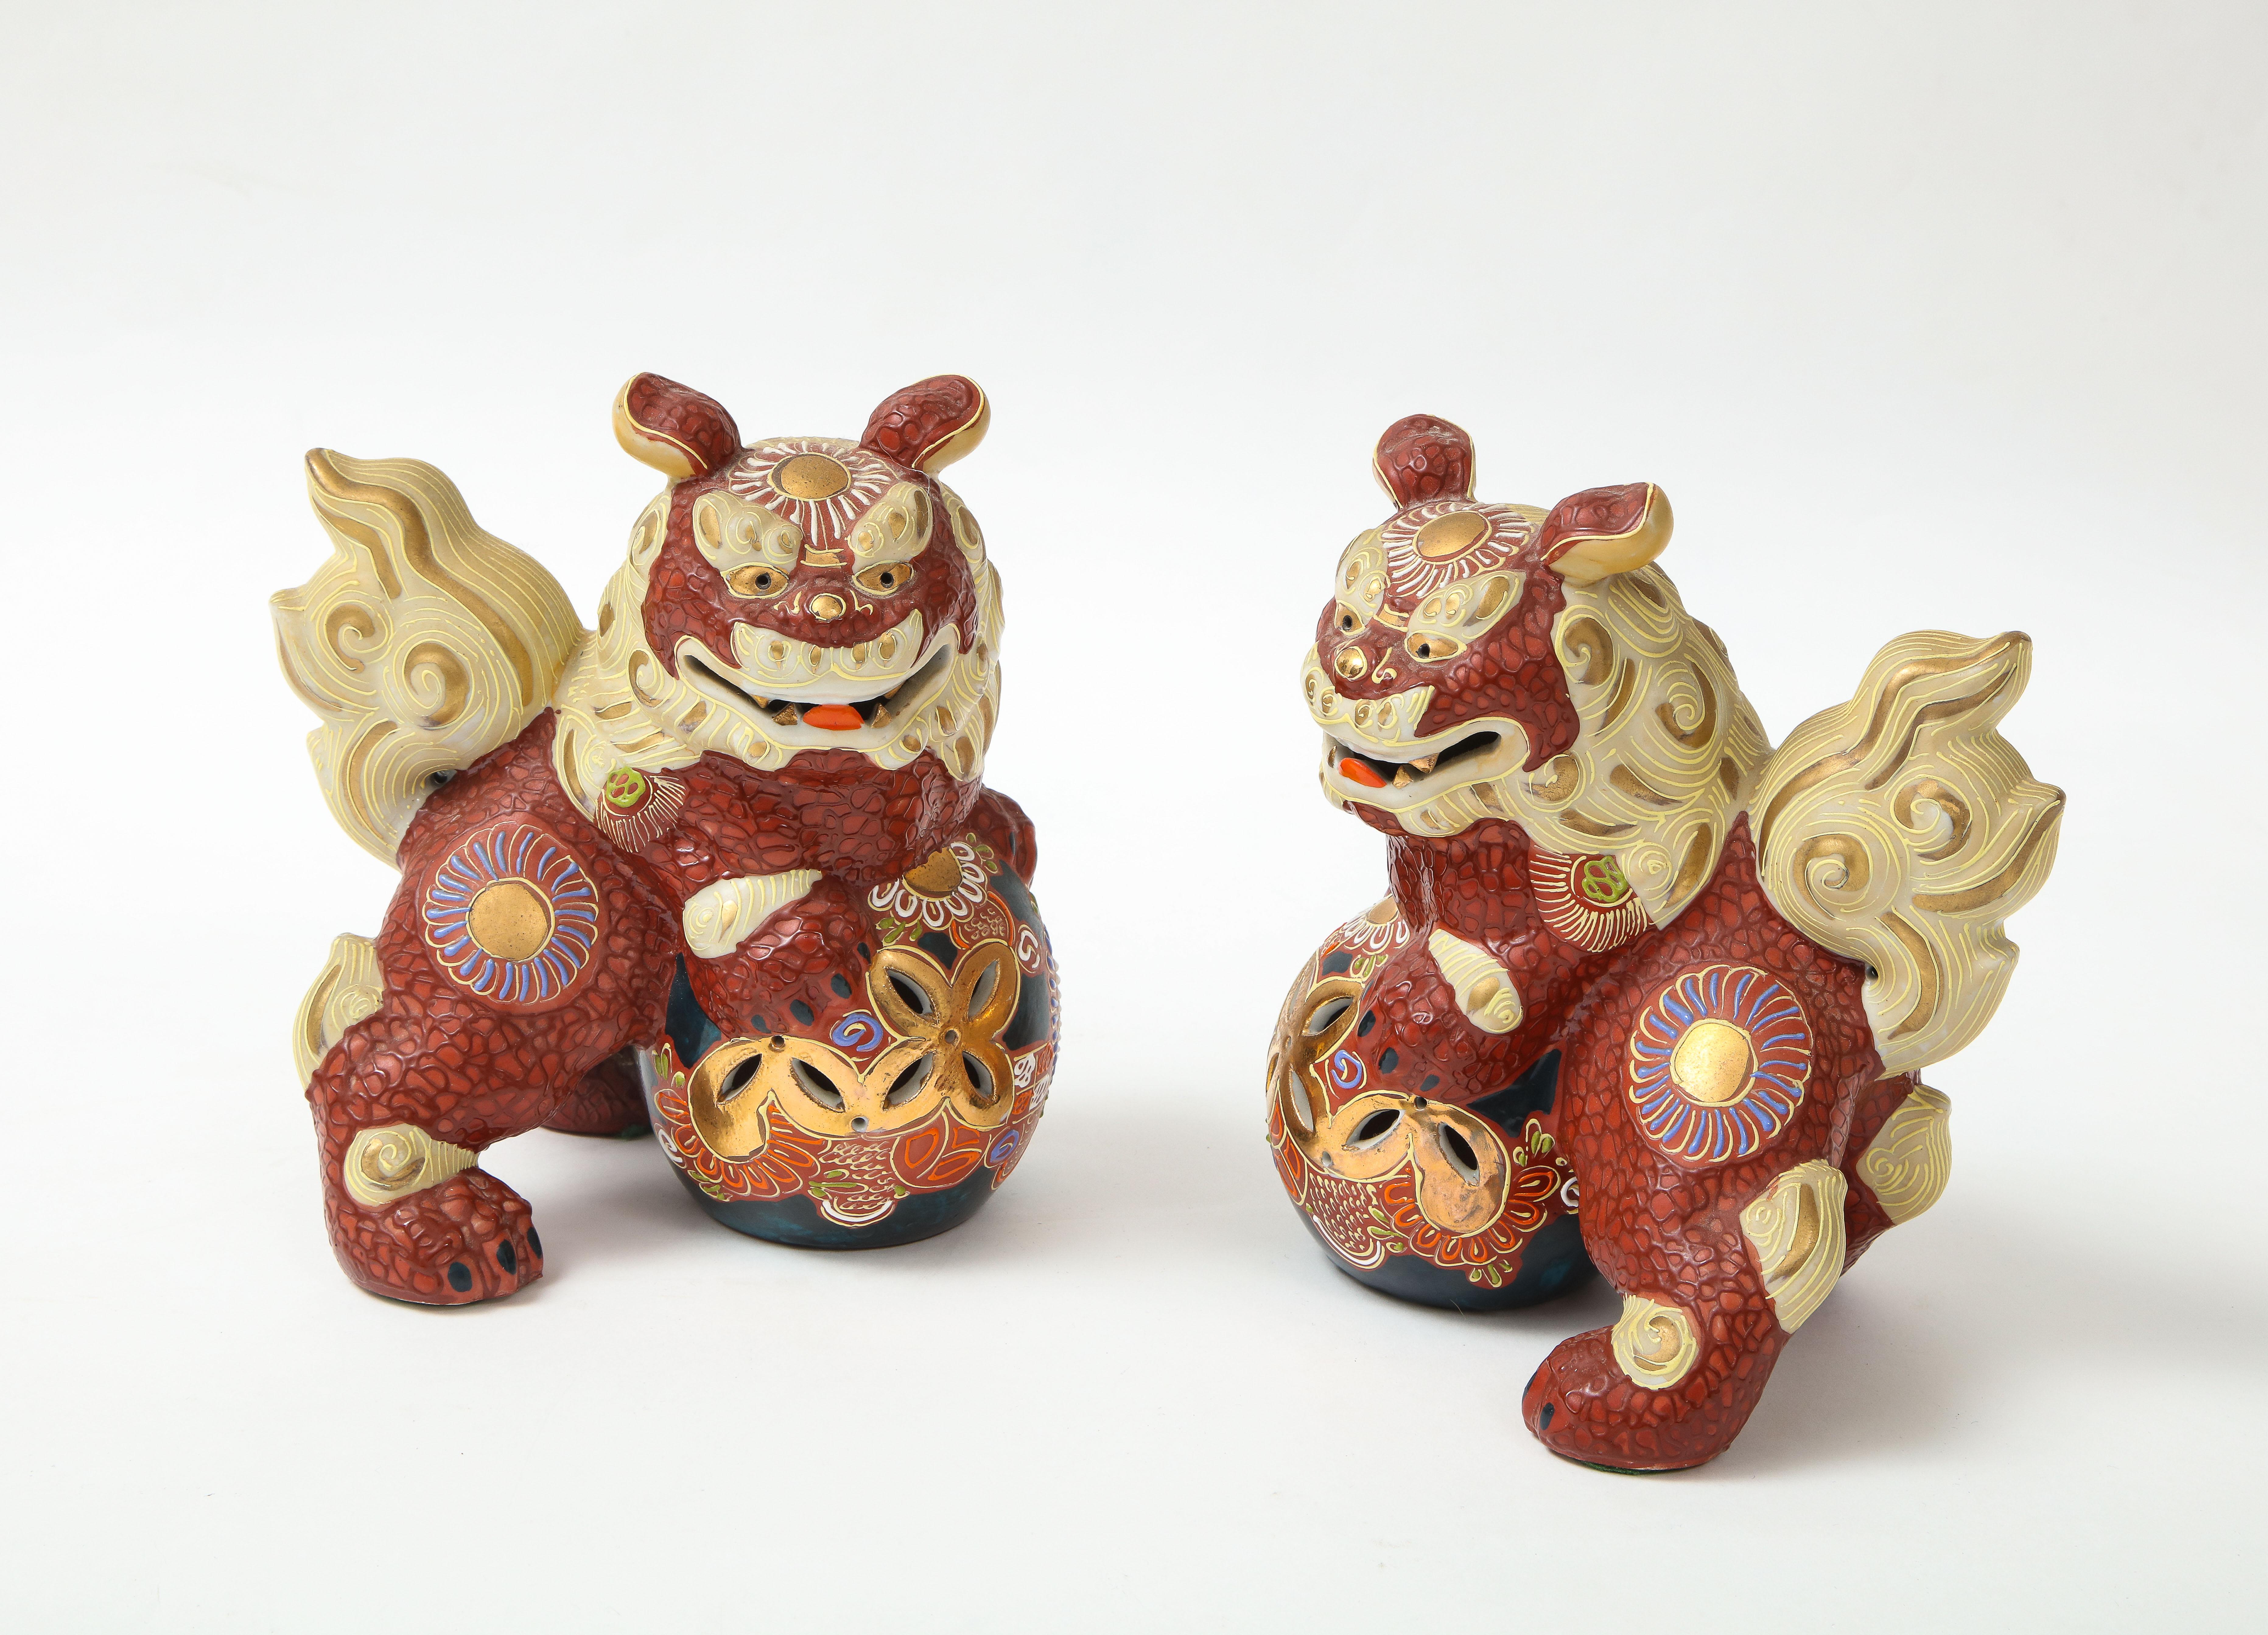 Pair of mid century hand decorated porcelain foo dogs featuring a cinnabar ground accented with colorful glaze polychrome and gold accents.